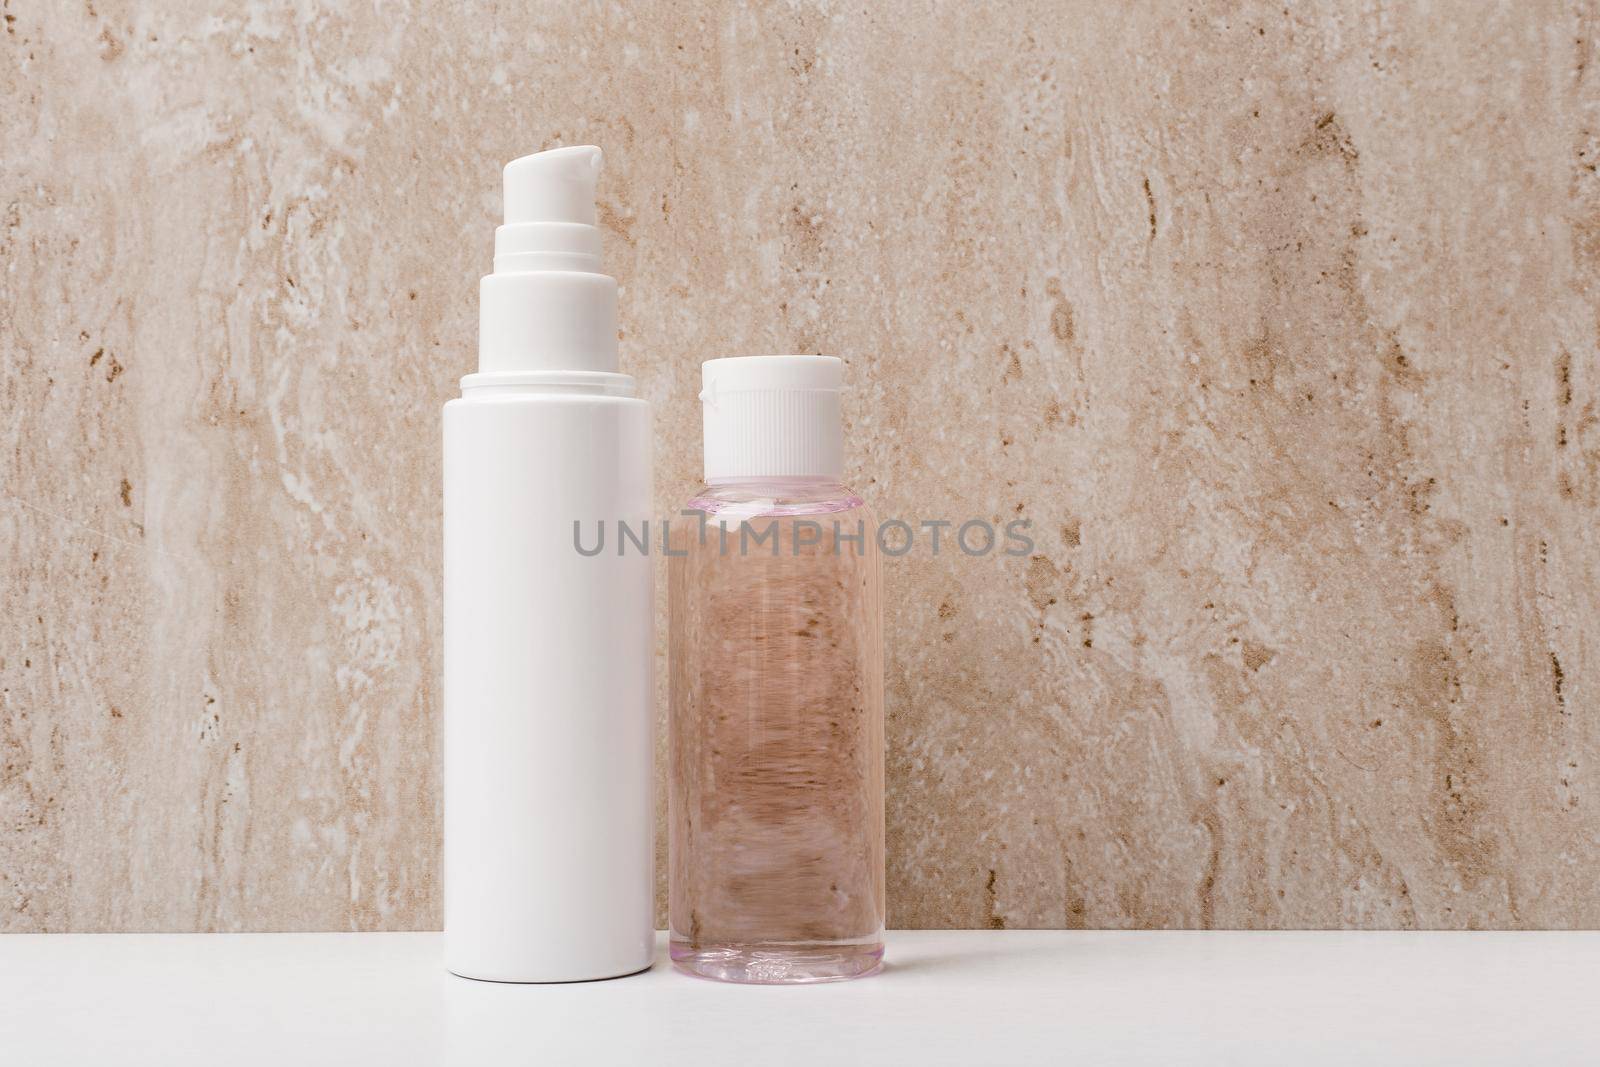 Face cream and cleansing lotion on white table against marble background. Concept of beauty routine and skincare by Senorina_Irina